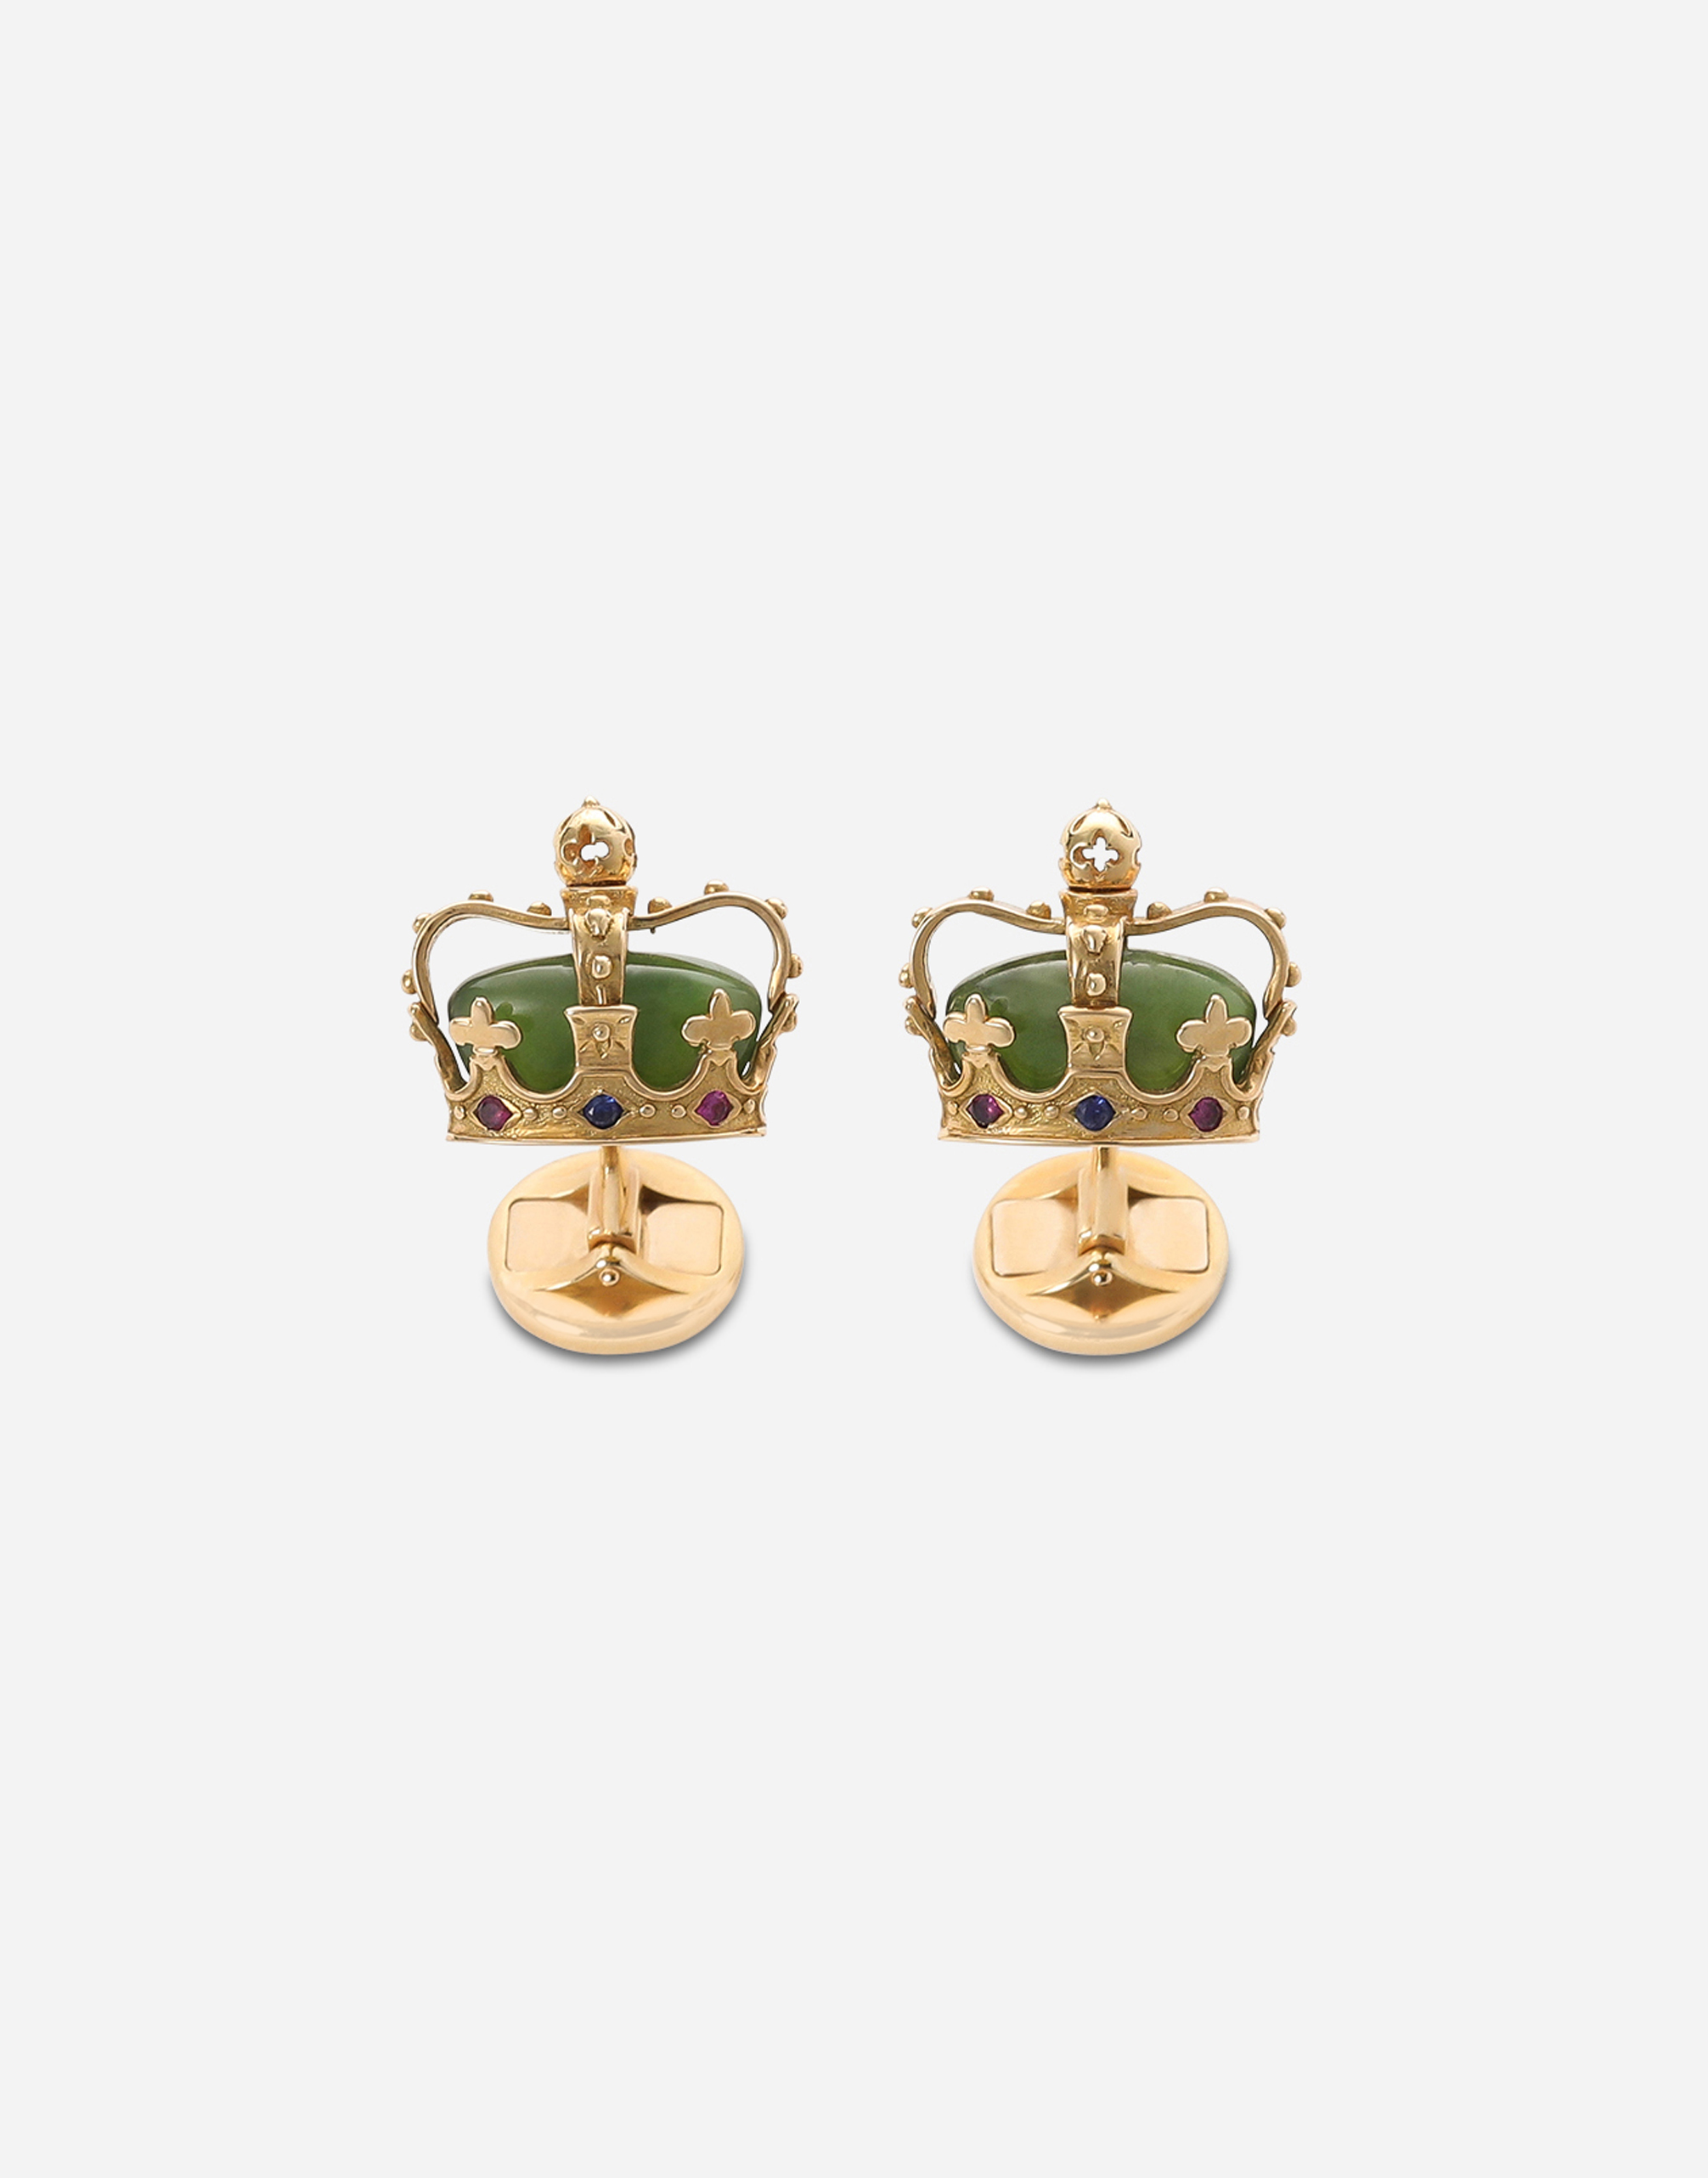 Crown yellow gold cufflinks with green jades